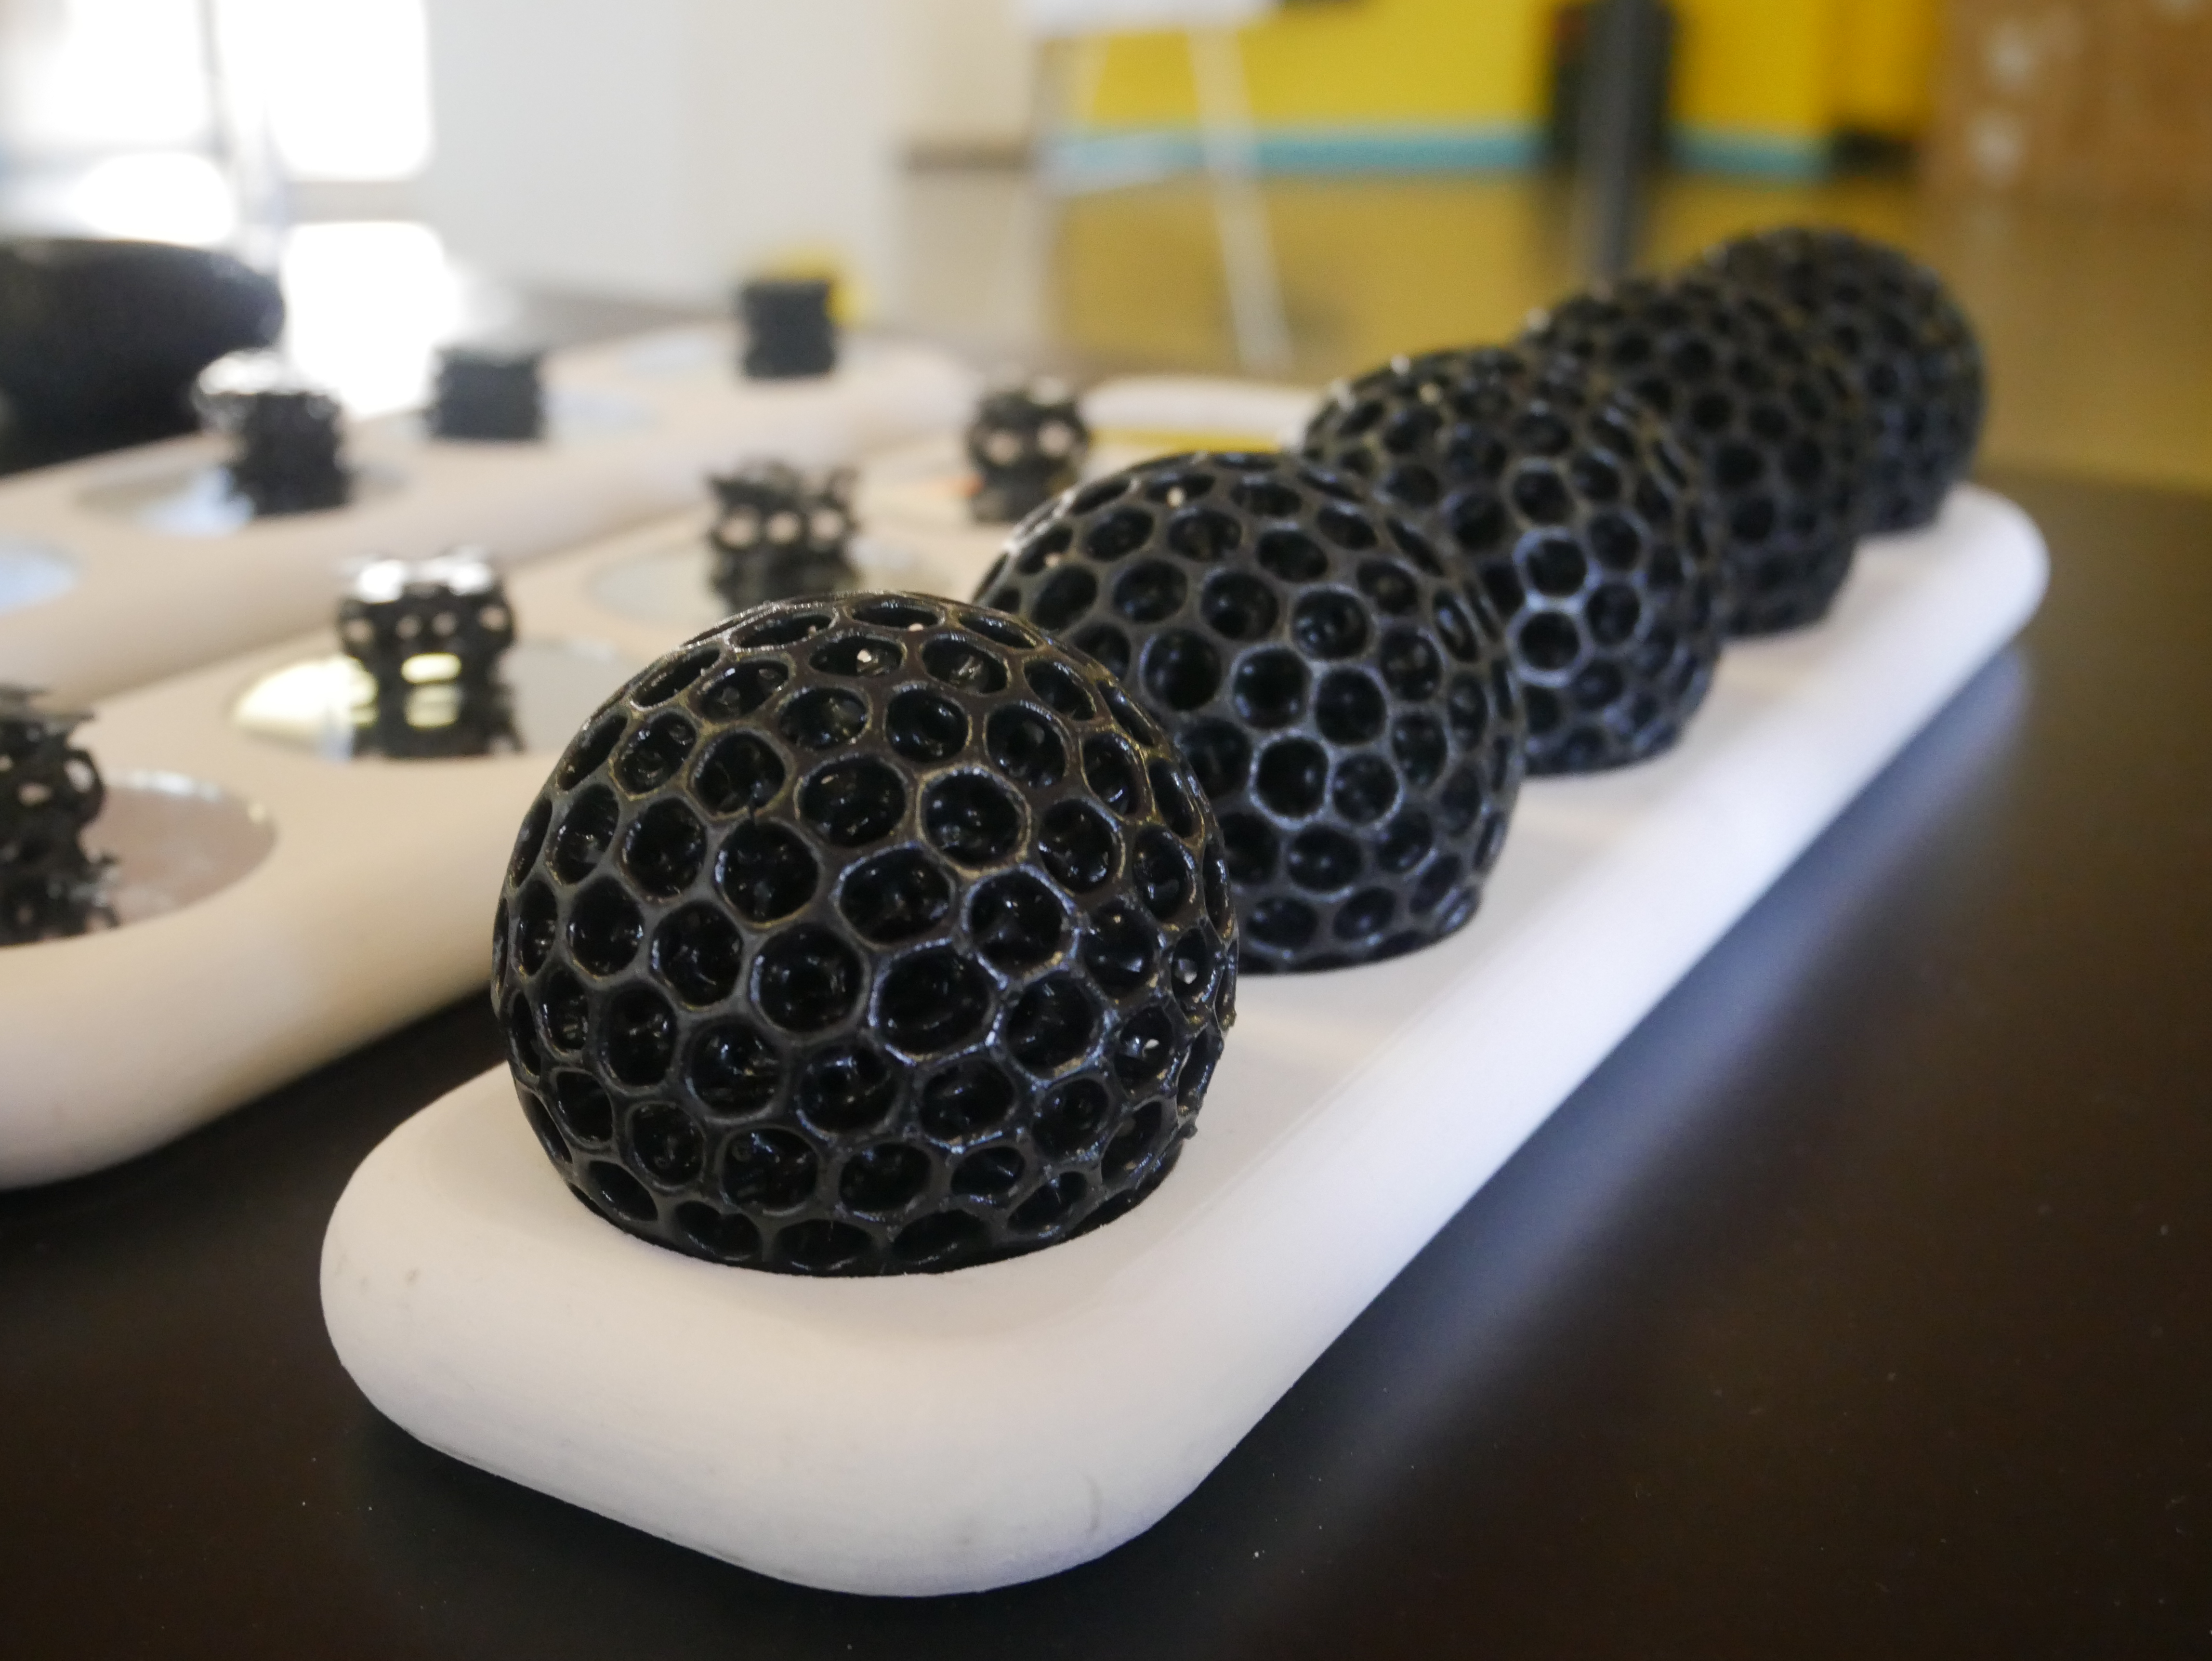 3D printed balls created from the newly developed New Balance Formlabs resin. photo by Tia Vialva.